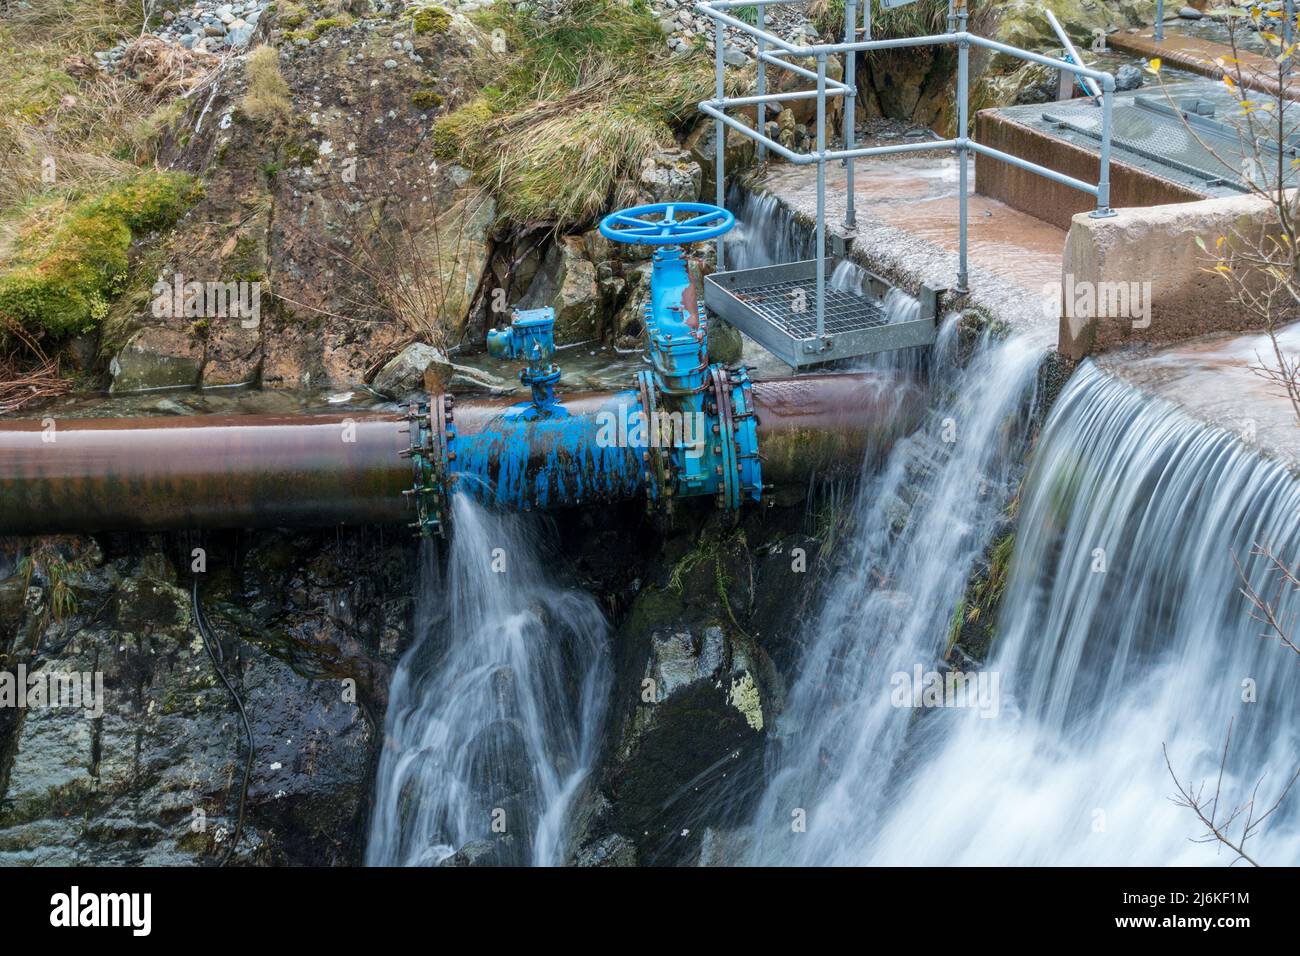 Leaking water pipe and gate valve at Hydroelectric plant water intake, Glenridding, Cumbria, England, UK Stock Photo